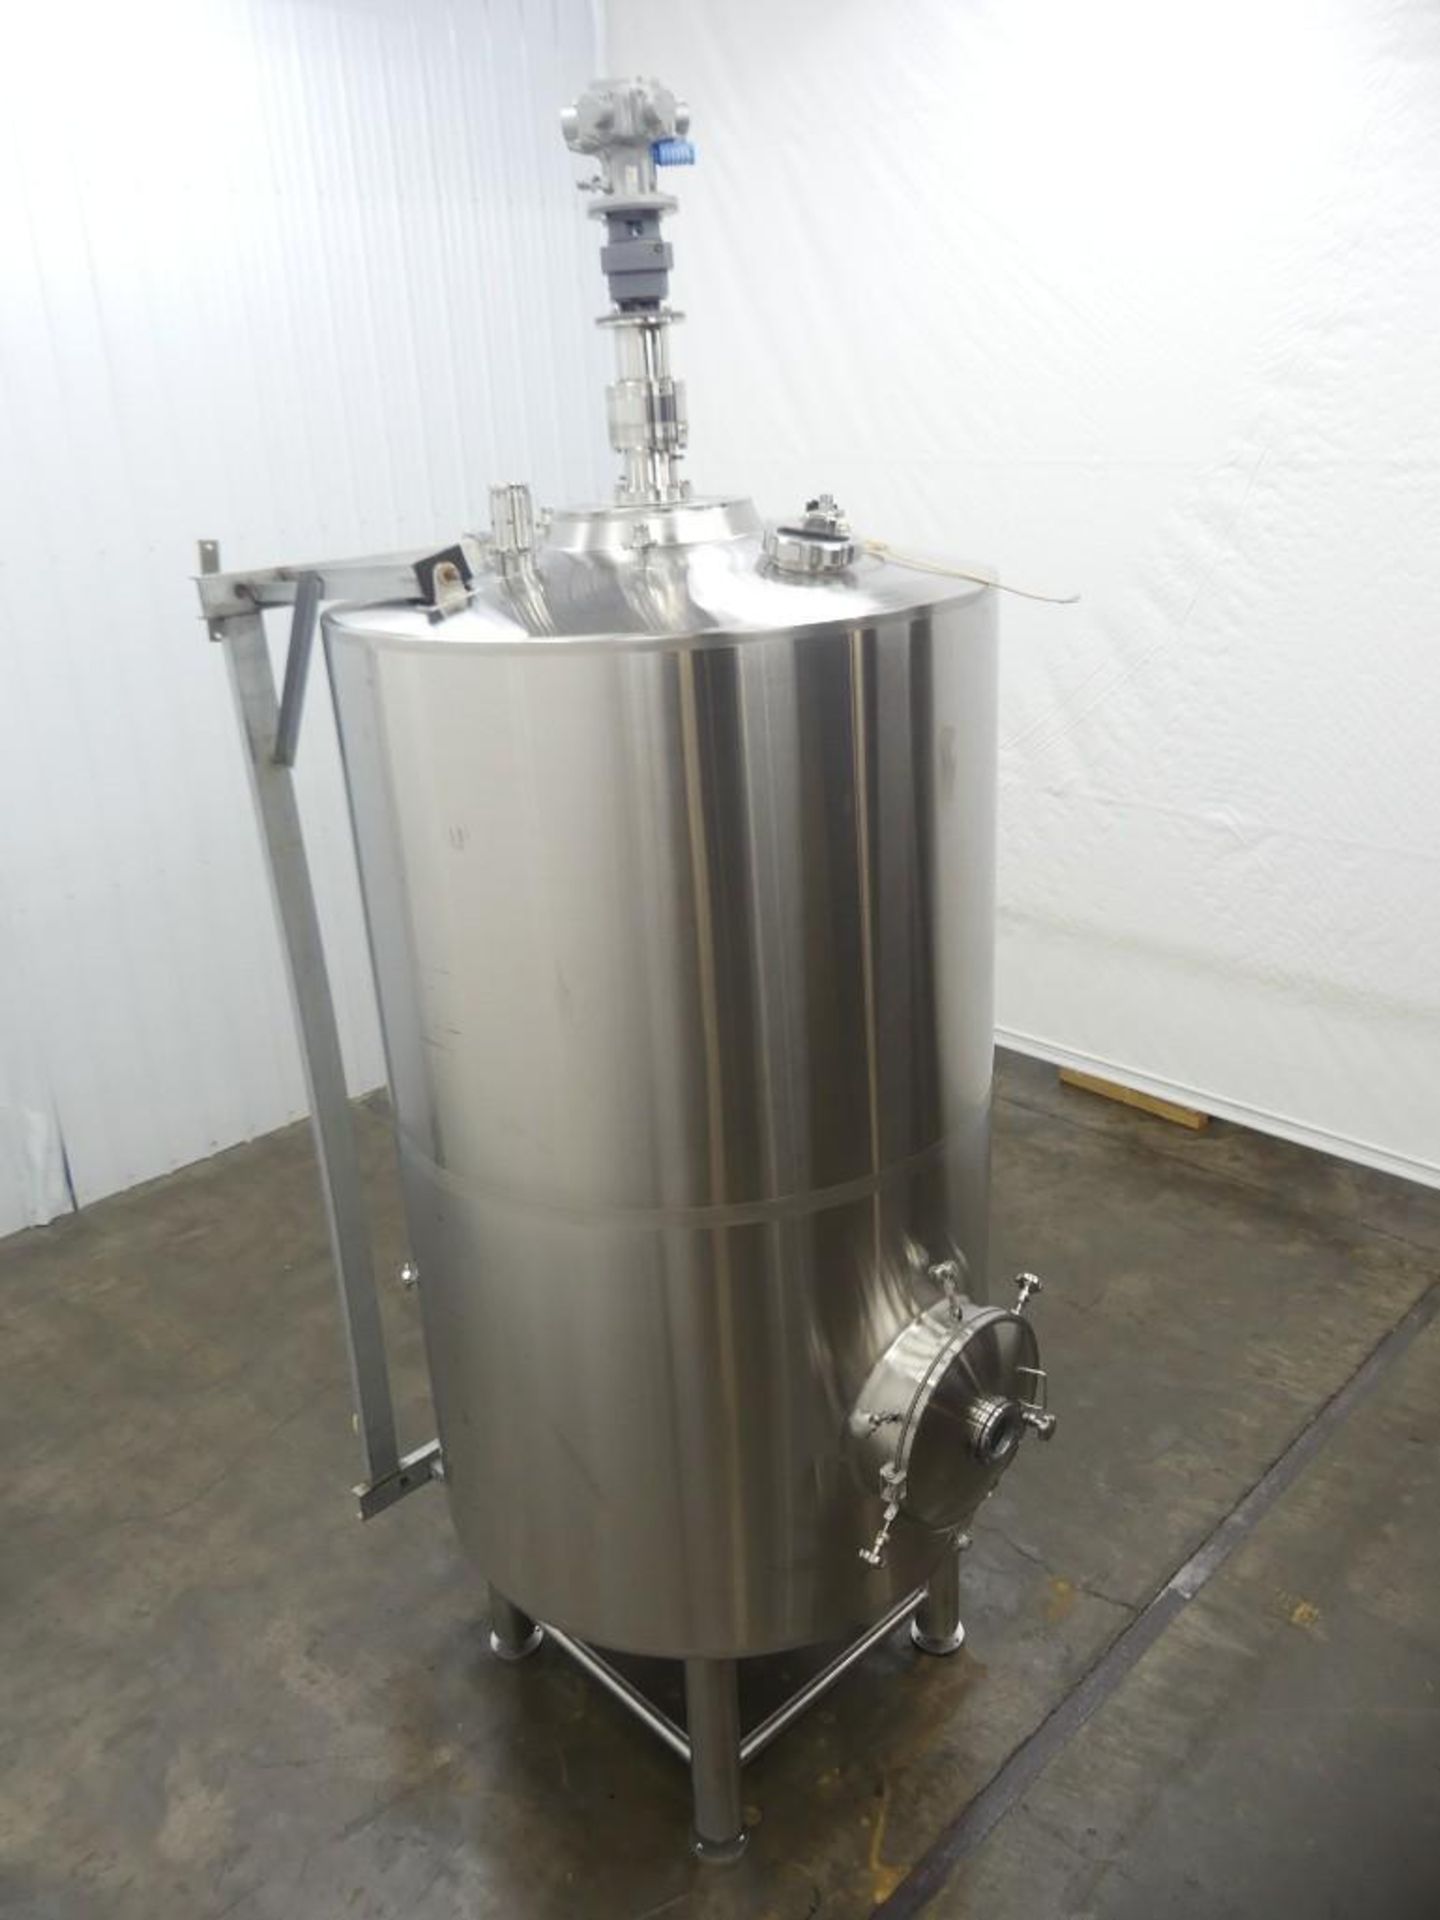 400 Gallon Stainless Steel Tank - Image 2 of 7